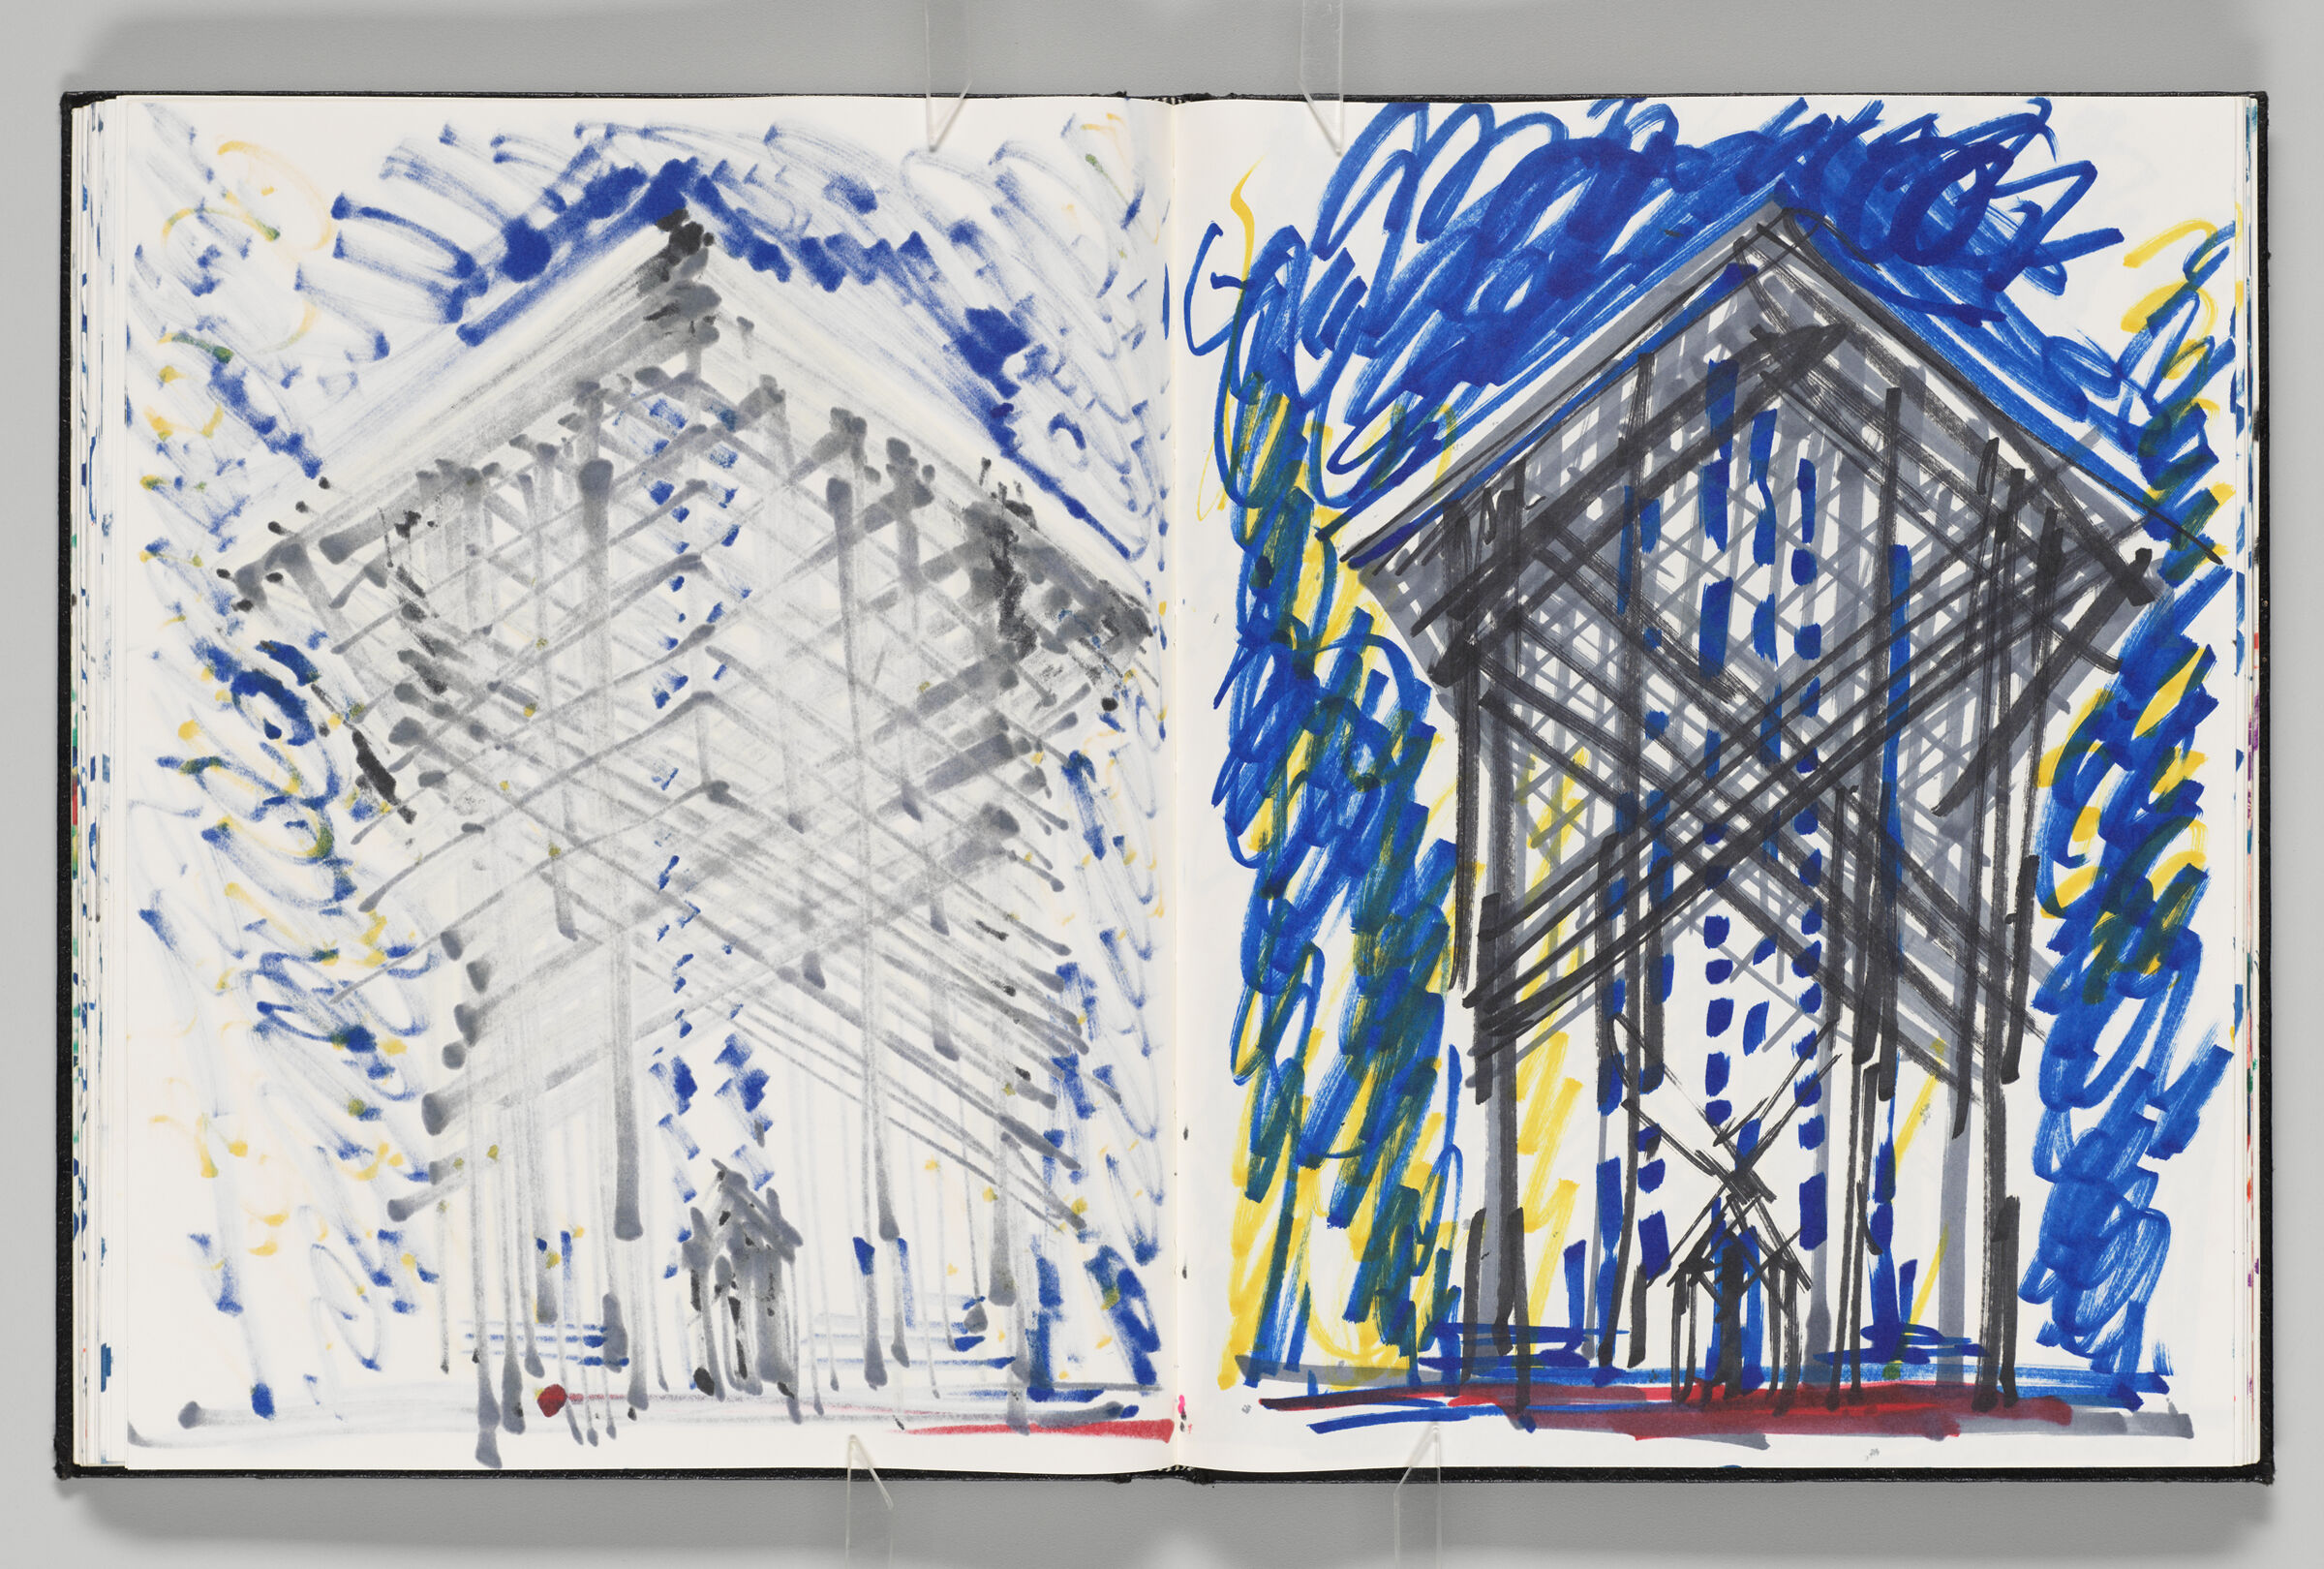 Untitled (Bleed-Through Of Previous Page, Left Page); Untitled (Thorn Crown Chapel, Right Page)